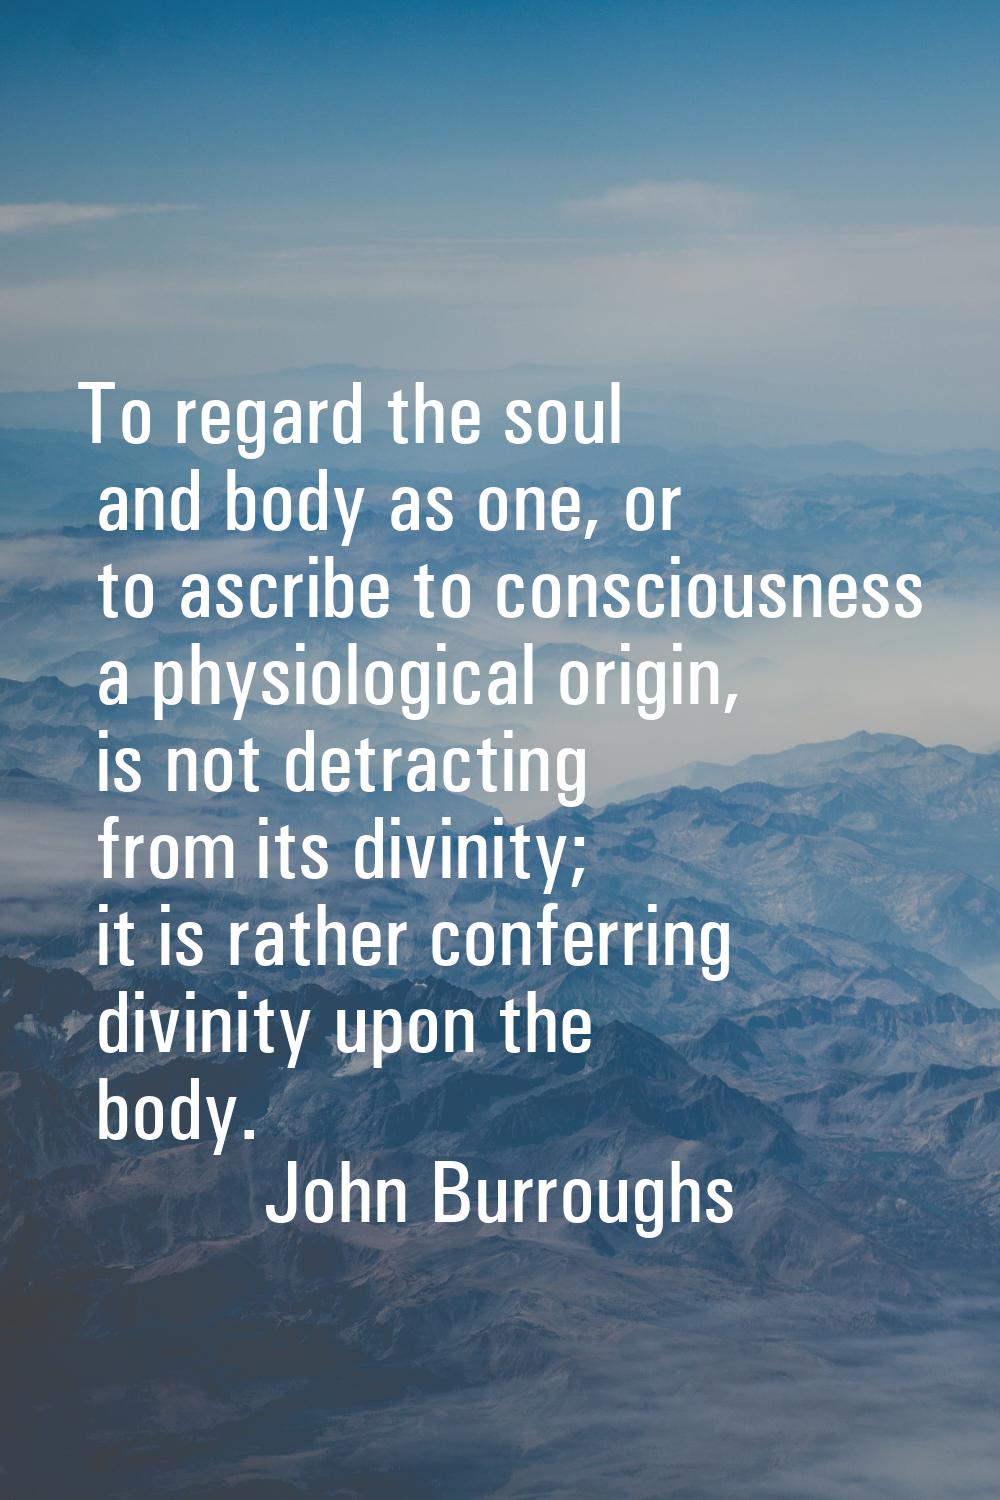 To regard the soul and body as one, or to ascribe to consciousness a physiological origin, is not d